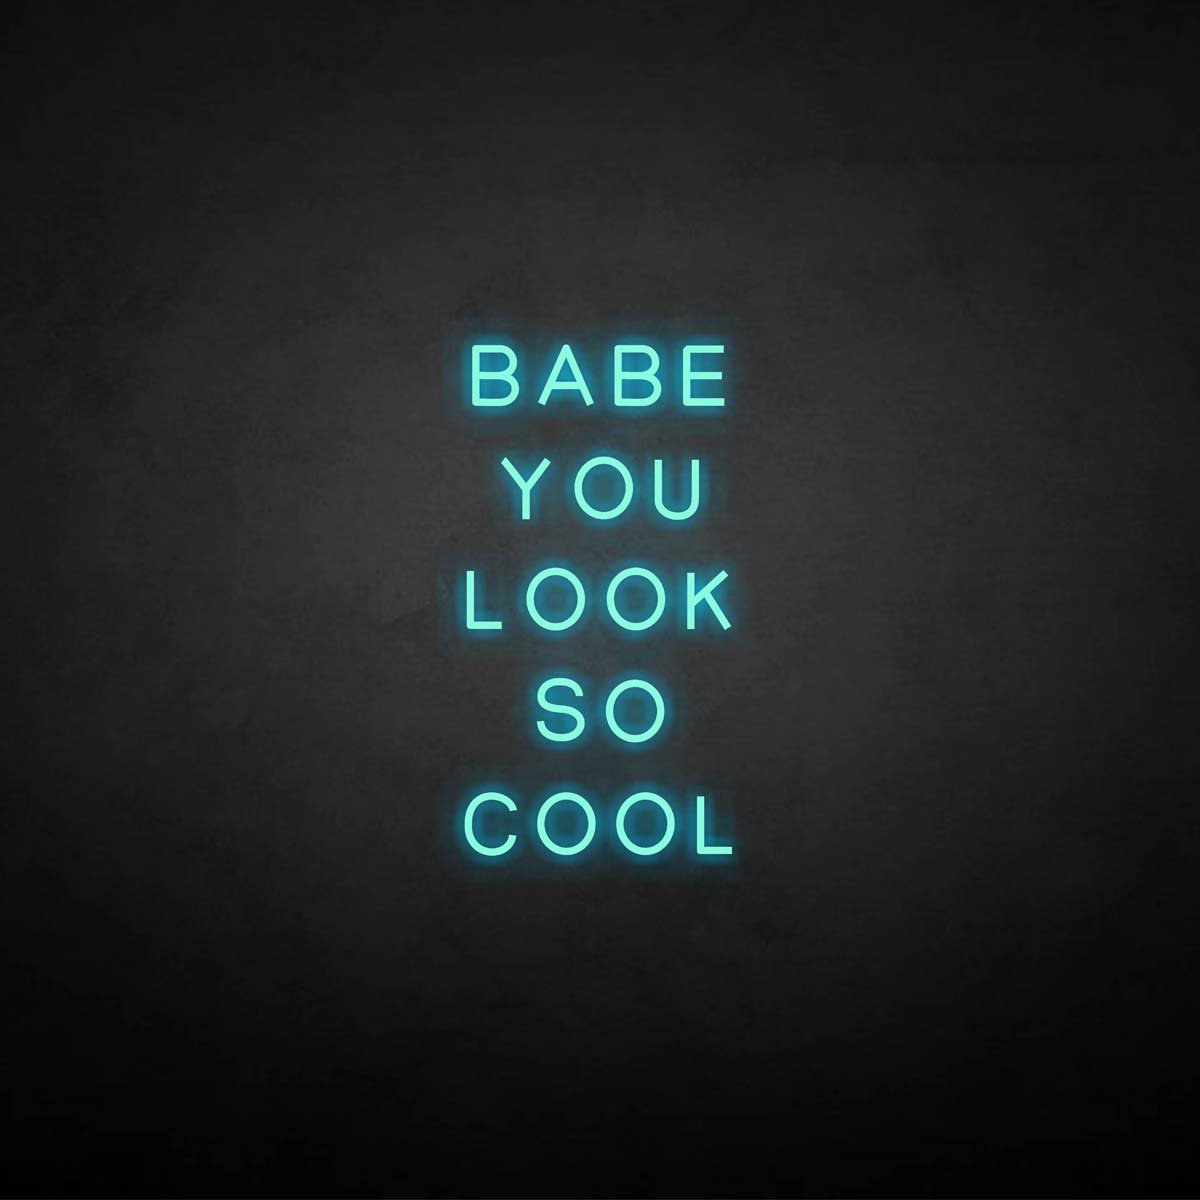 Babe You Look So Cool neon sign